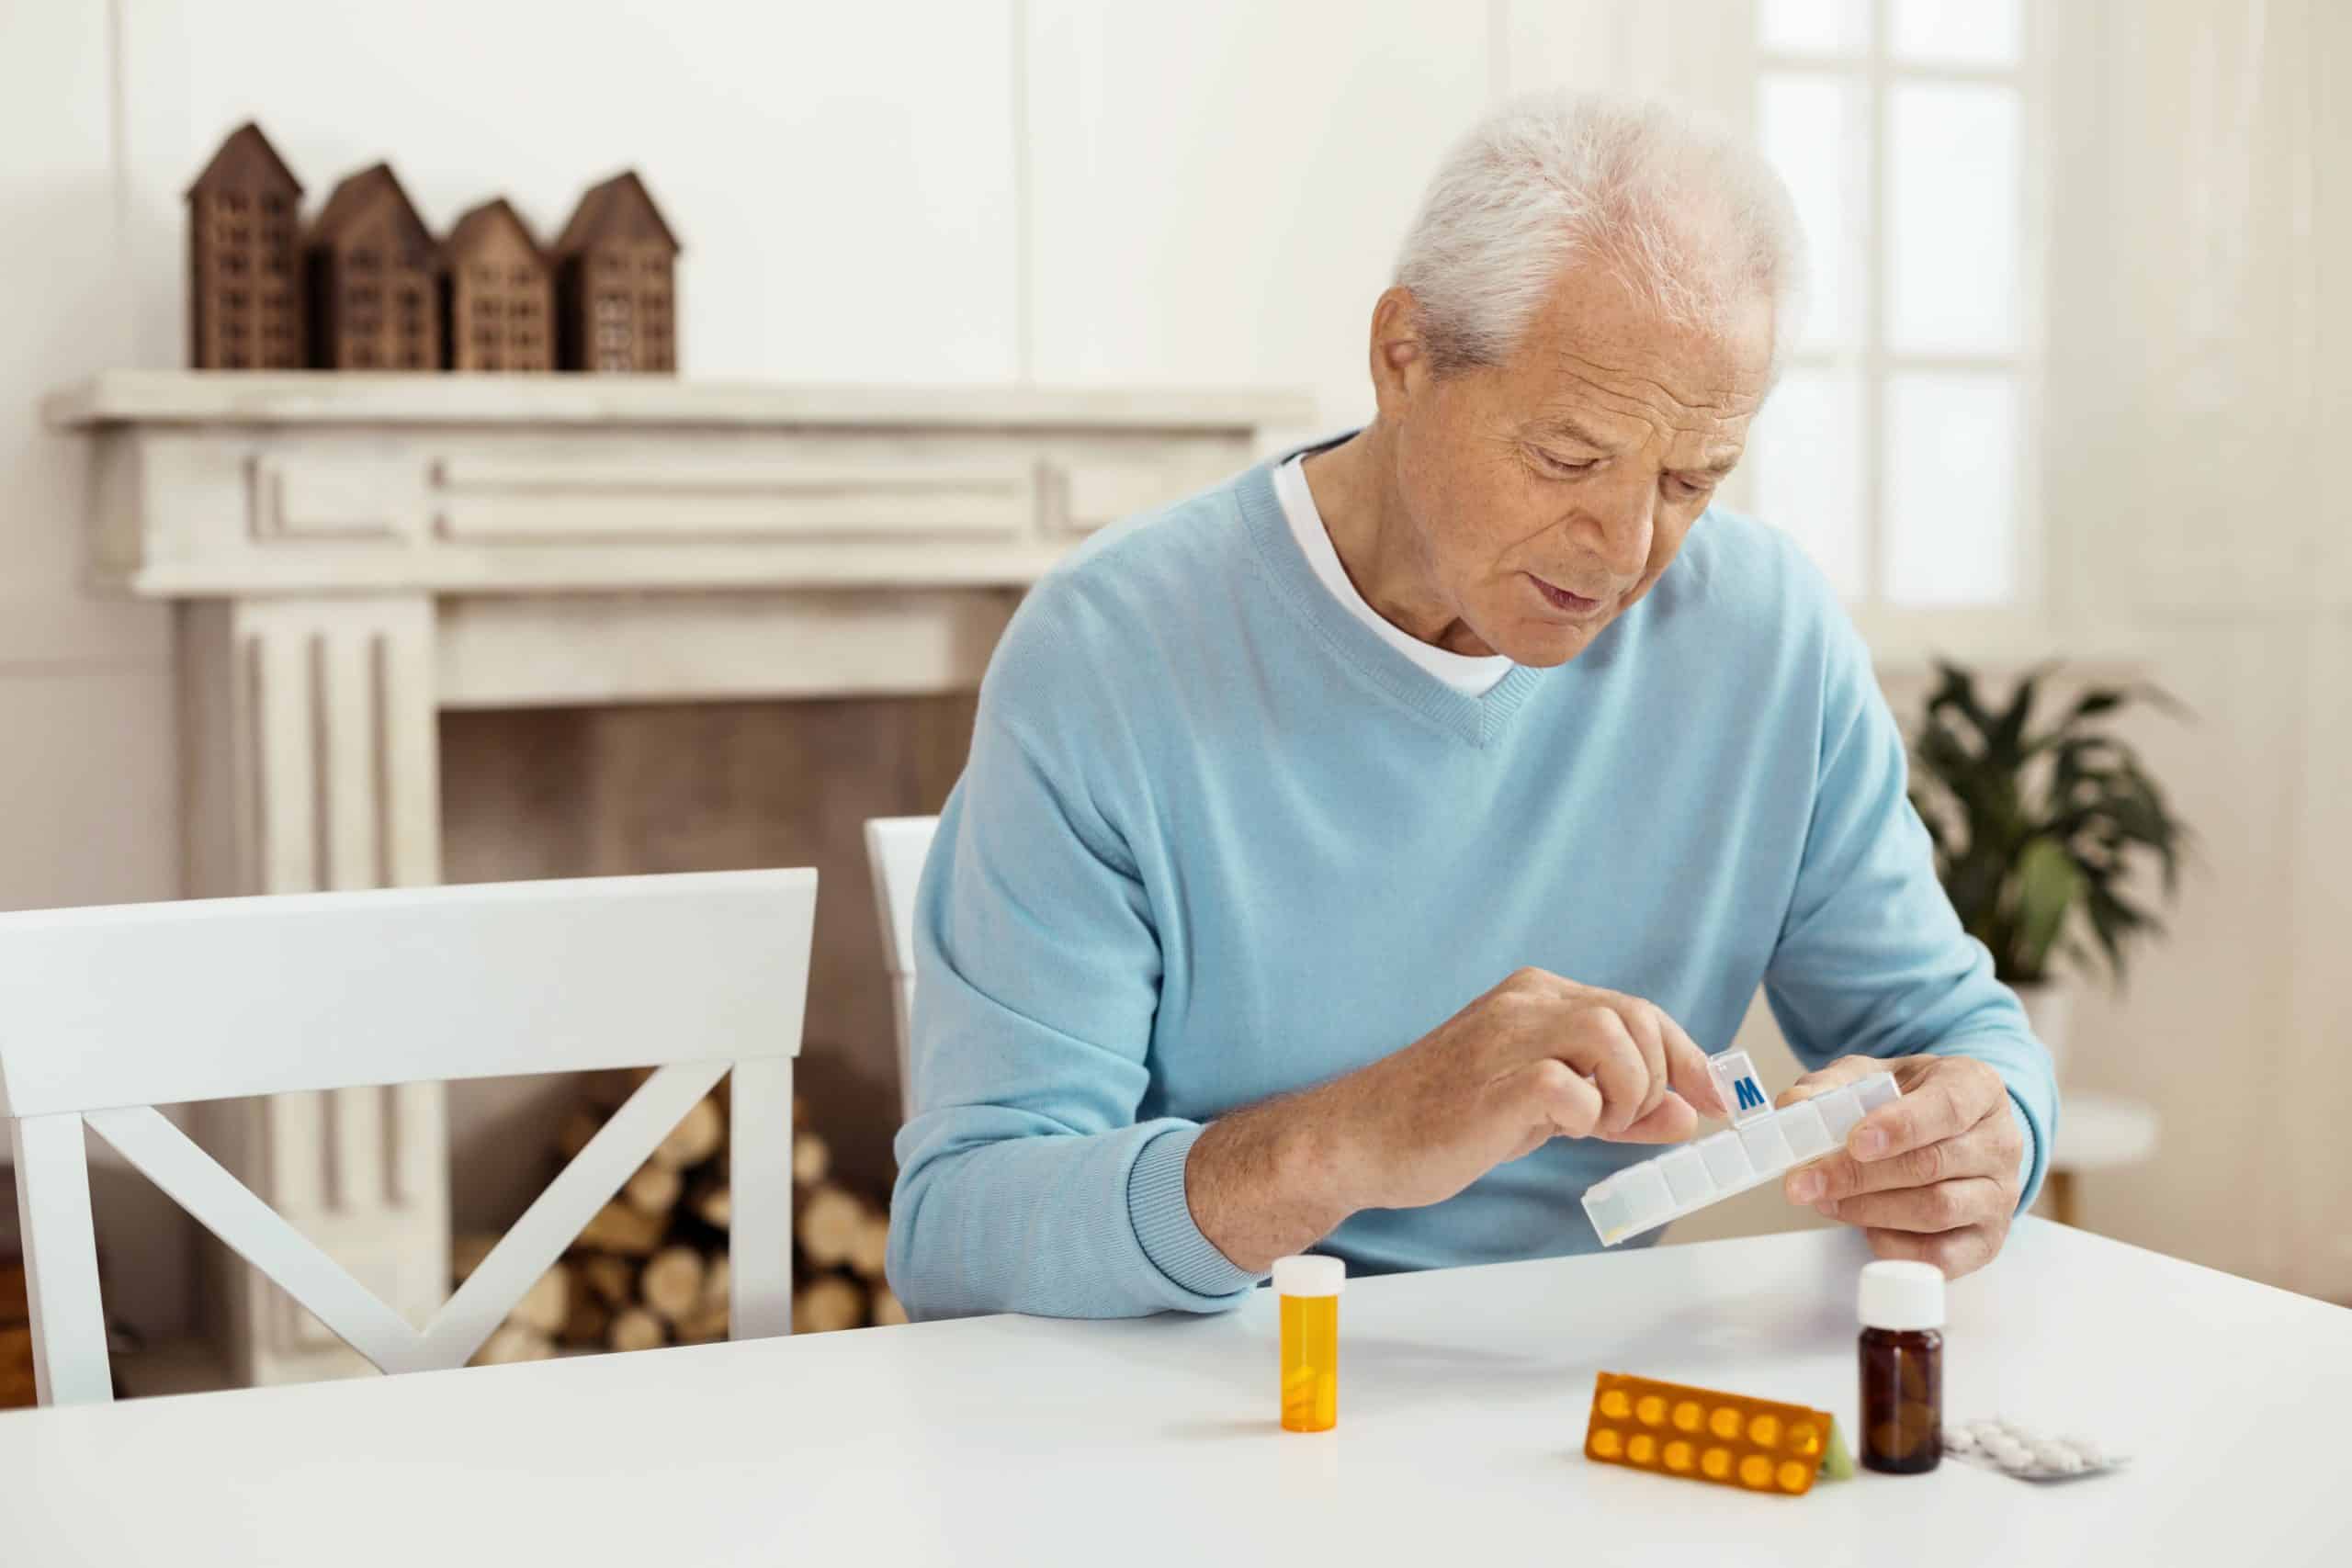 Gray-haired man putting pills in pill case.